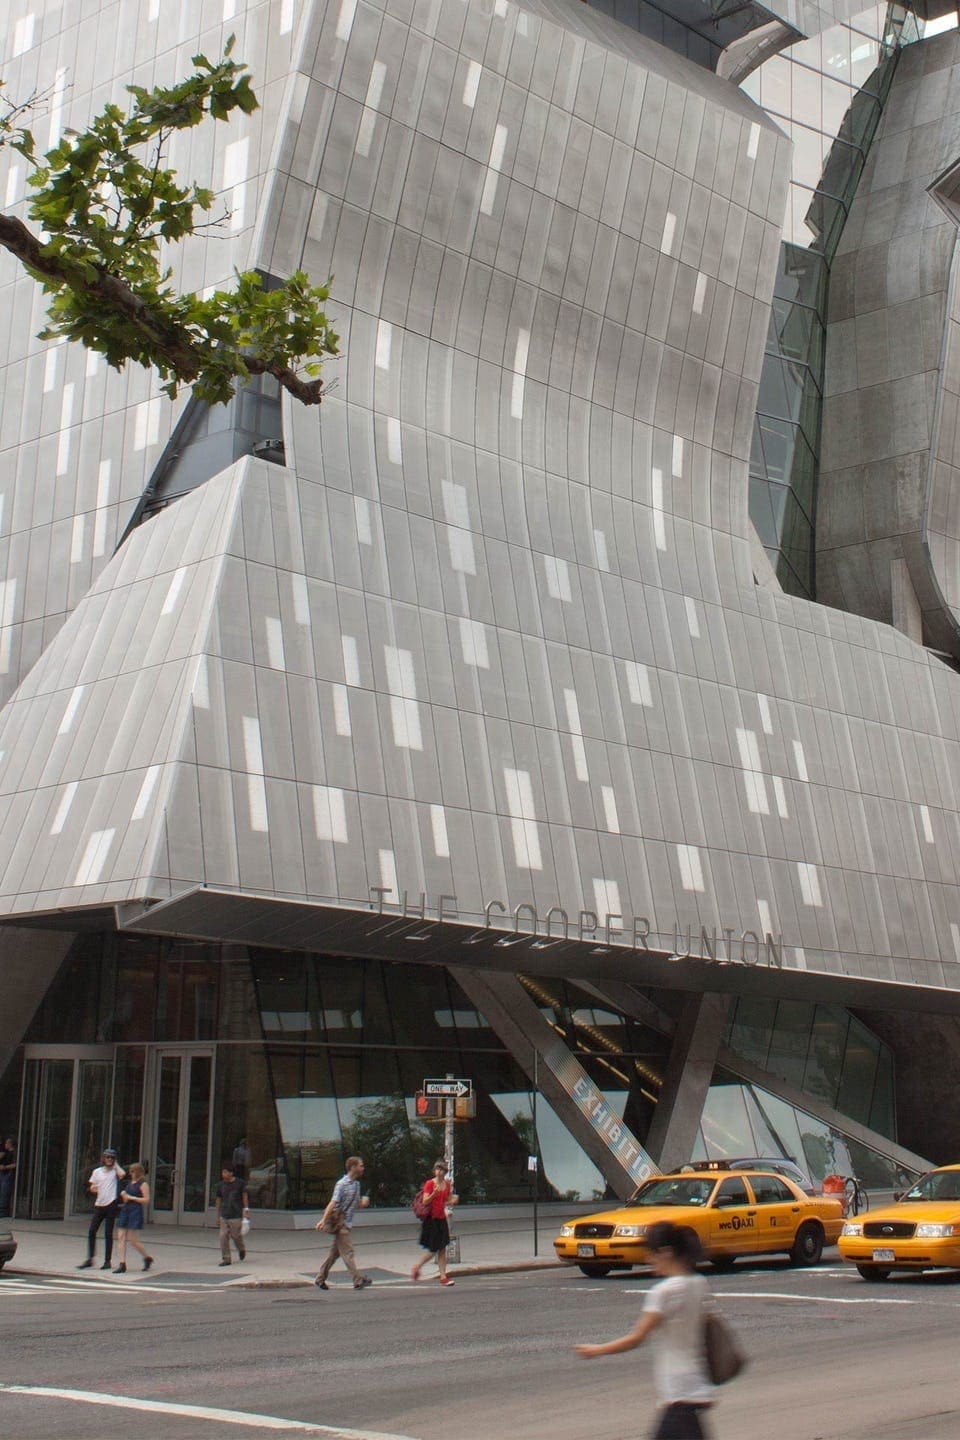 PICTURED: COOPER UNION NEW ACADEMIC BUILDING.